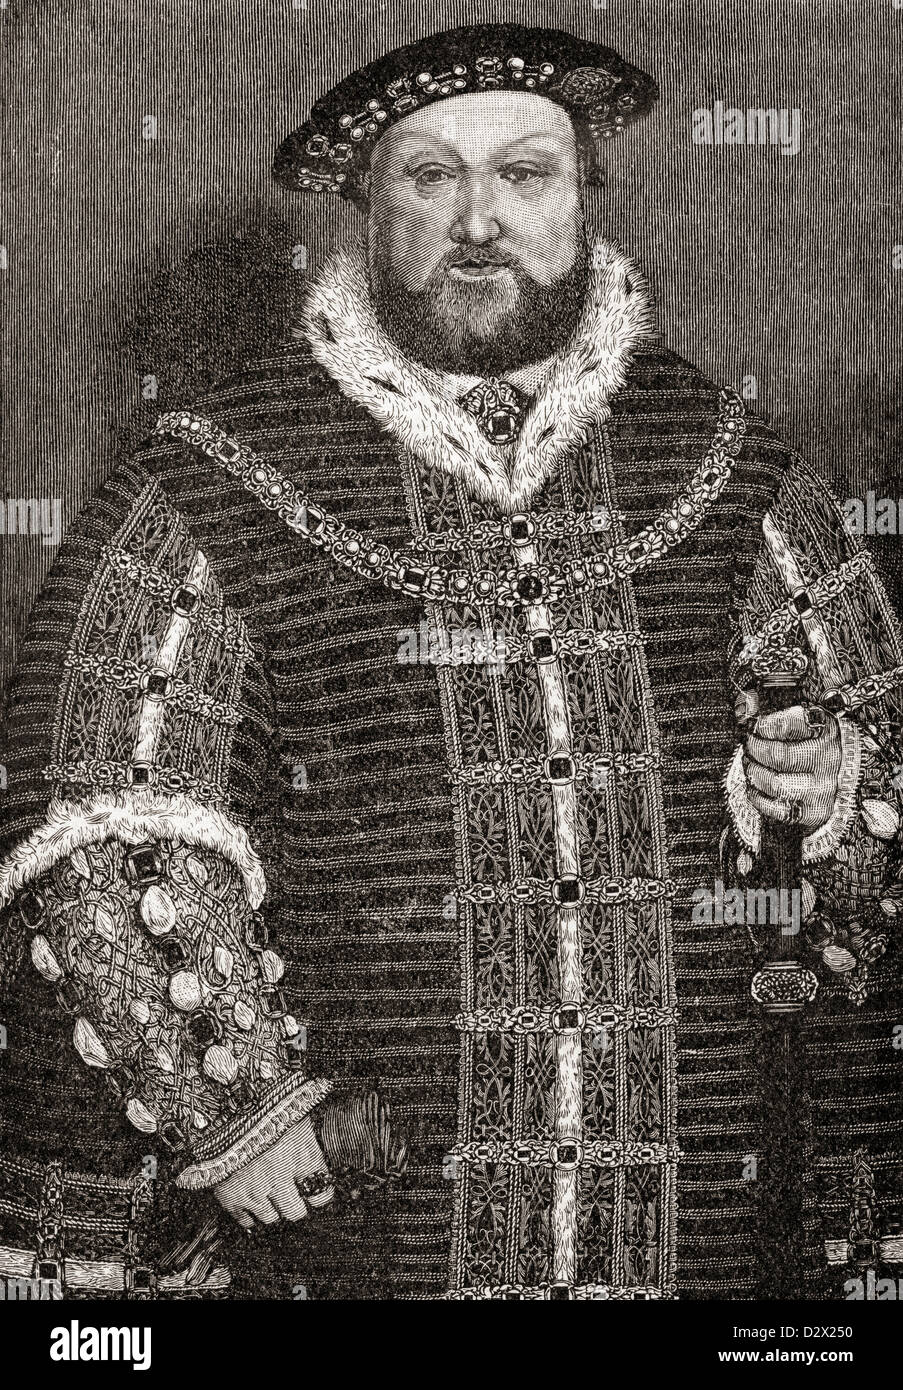 Henry VIII, 1491 to 1547. King of England and Ireland. From A First Book of British History published 1925. Stock Photo